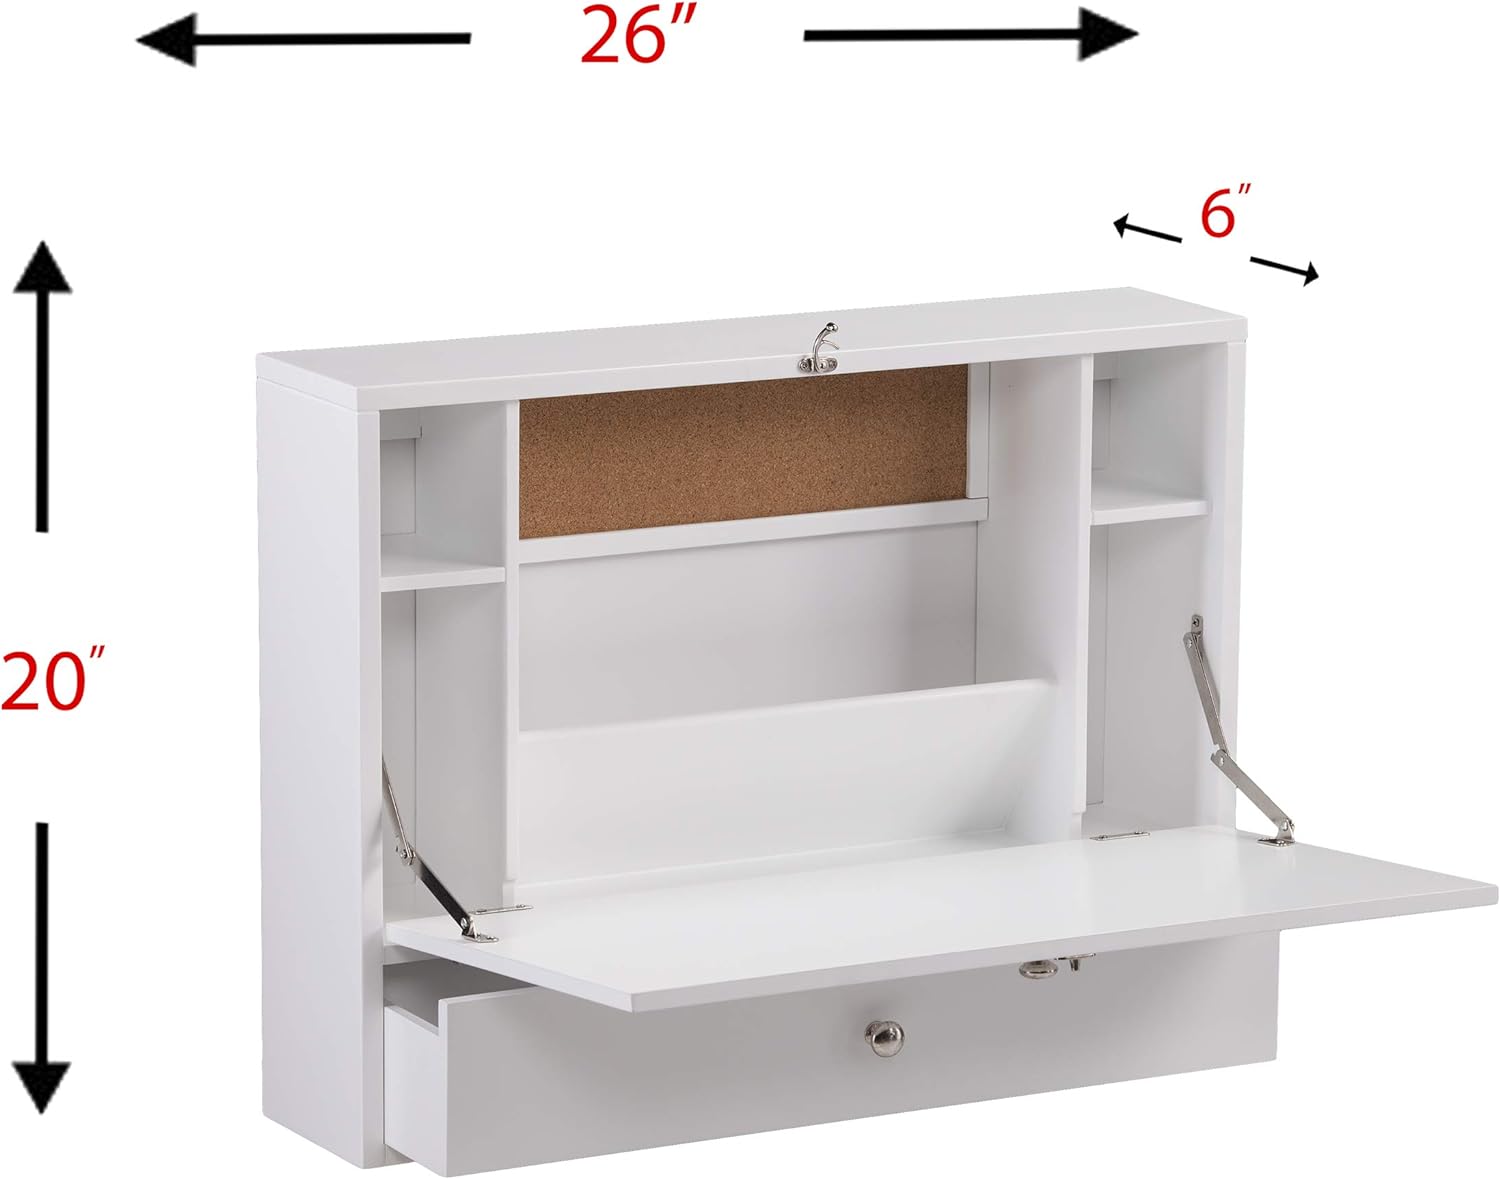 Willingham Wall Mounted Folding Desk dimensions